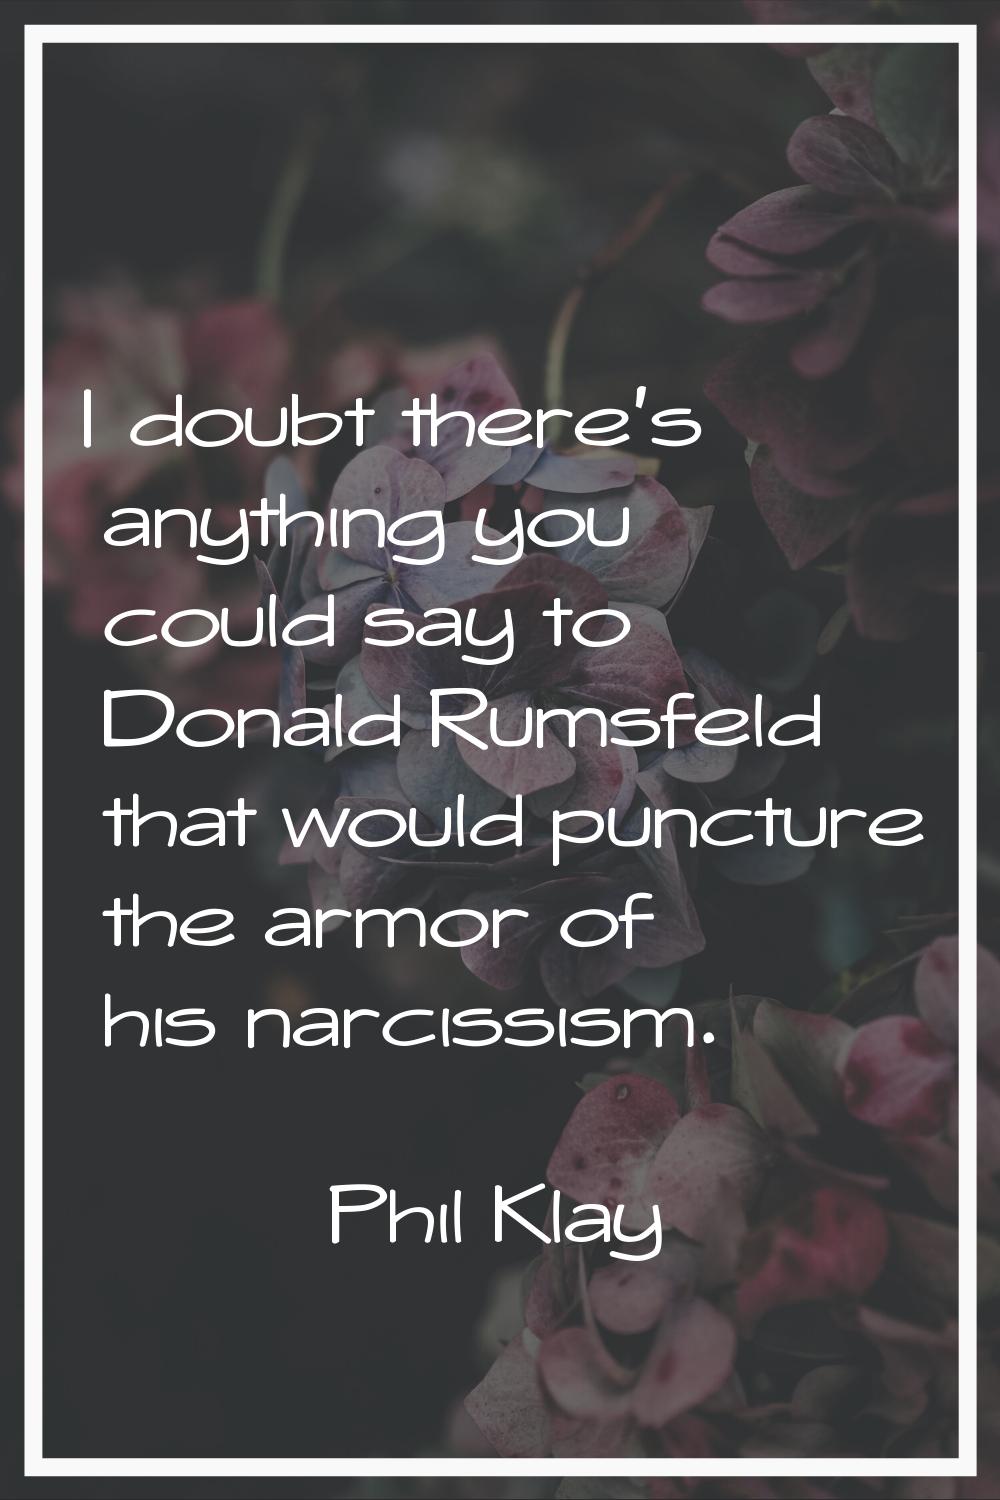 I doubt there's anything you could say to Donald Rumsfeld that would puncture the armor of his narc